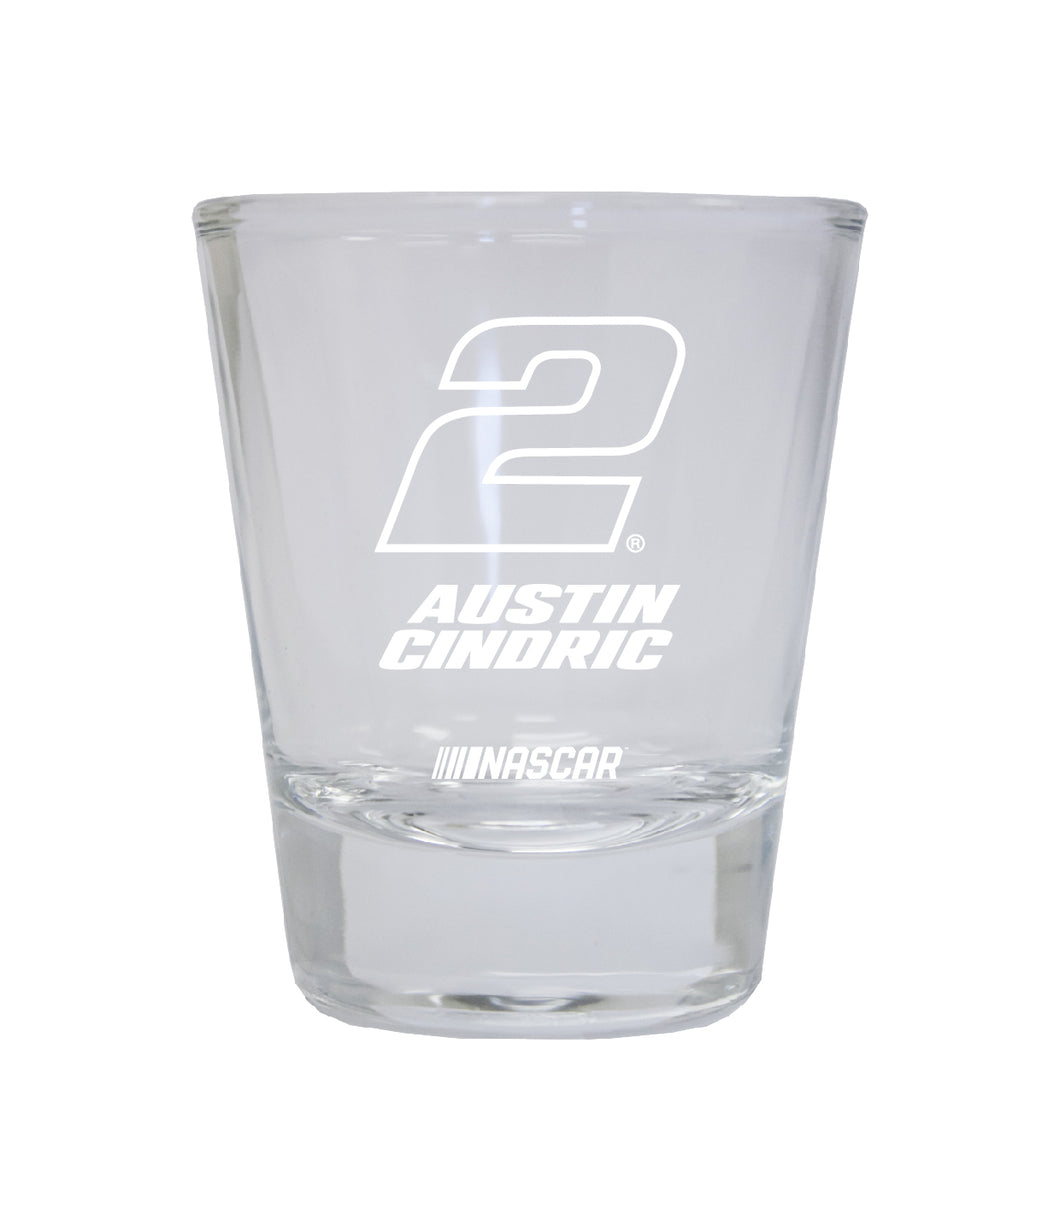 Austin Cindric #2 Nascar Etched Round Shot Glass New for 2022